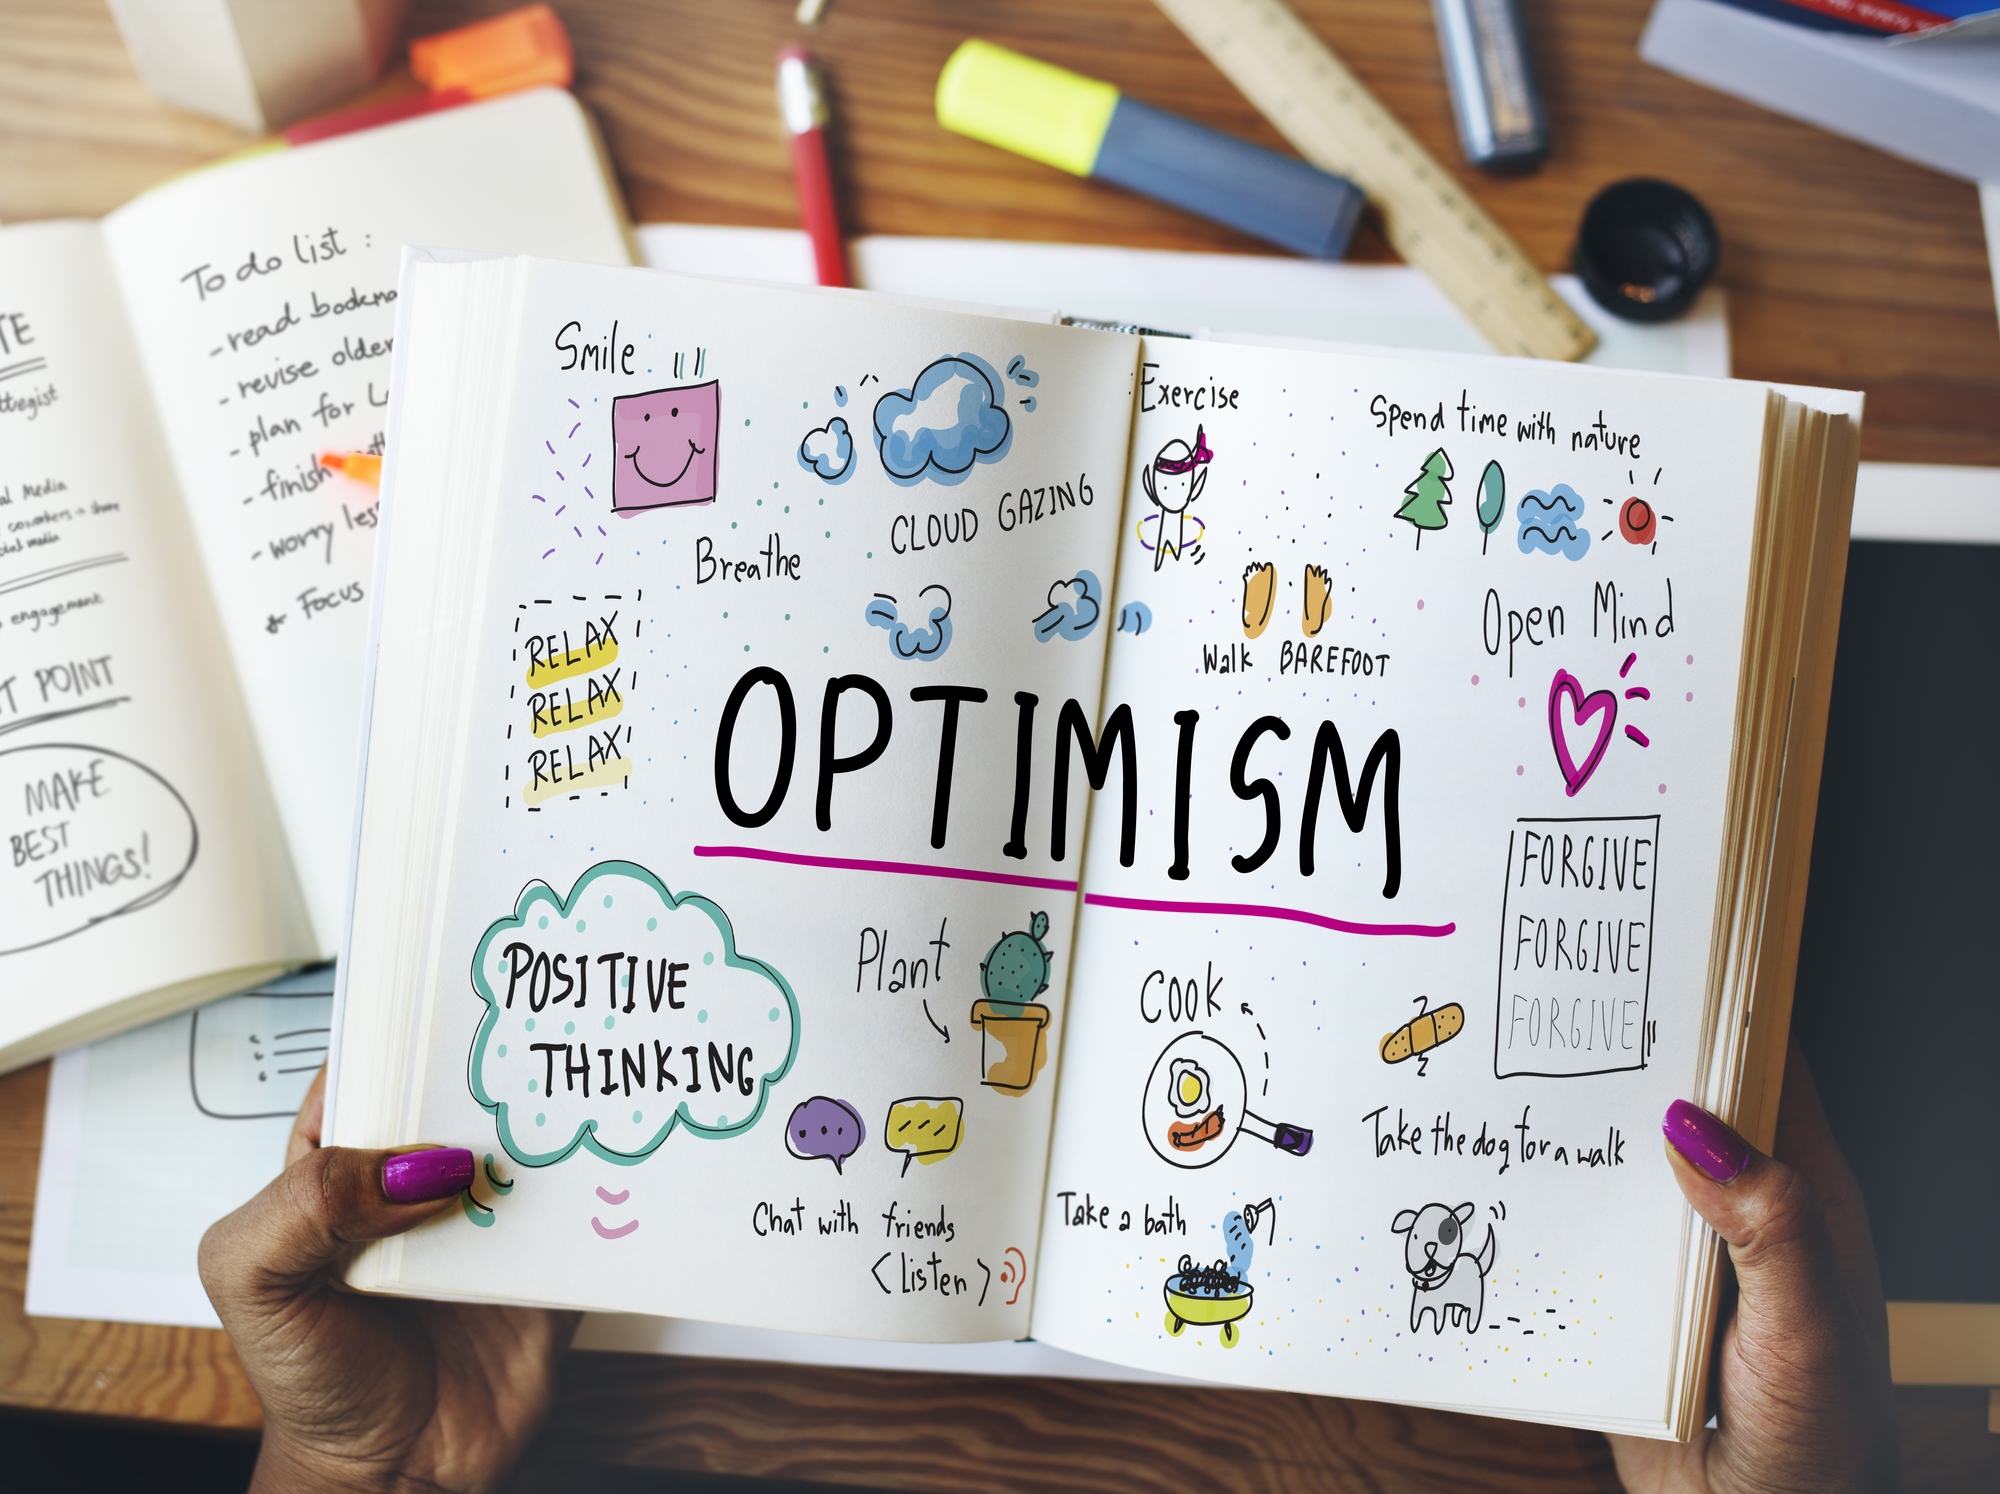 Learning How To Be Optimistic In 4 Simple Steps!